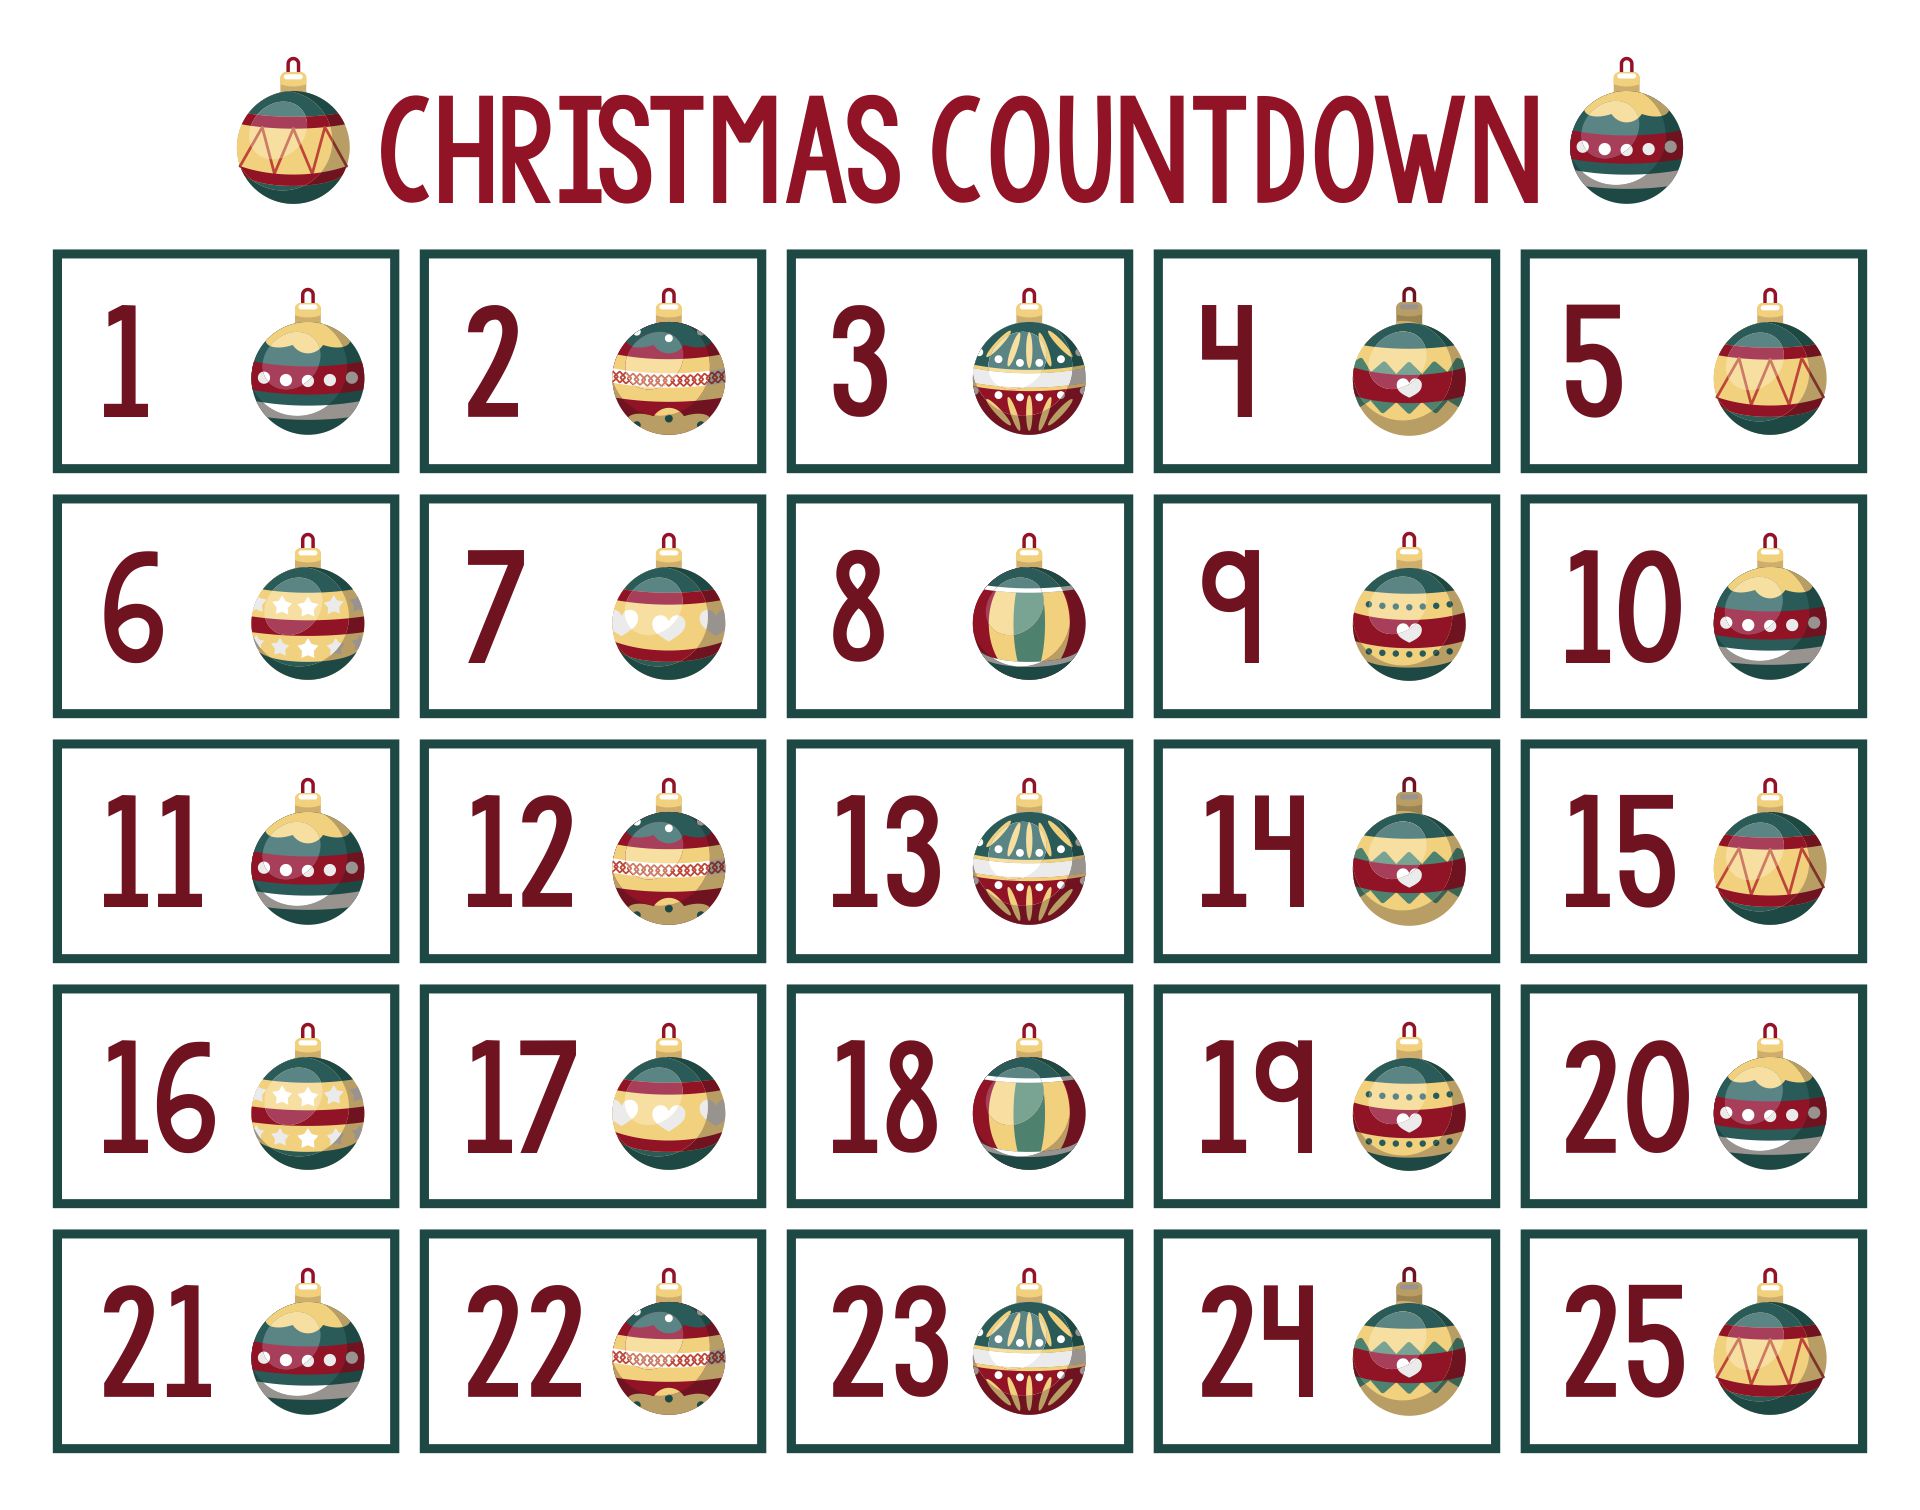 Christmas Countdown Ornament Number Cards